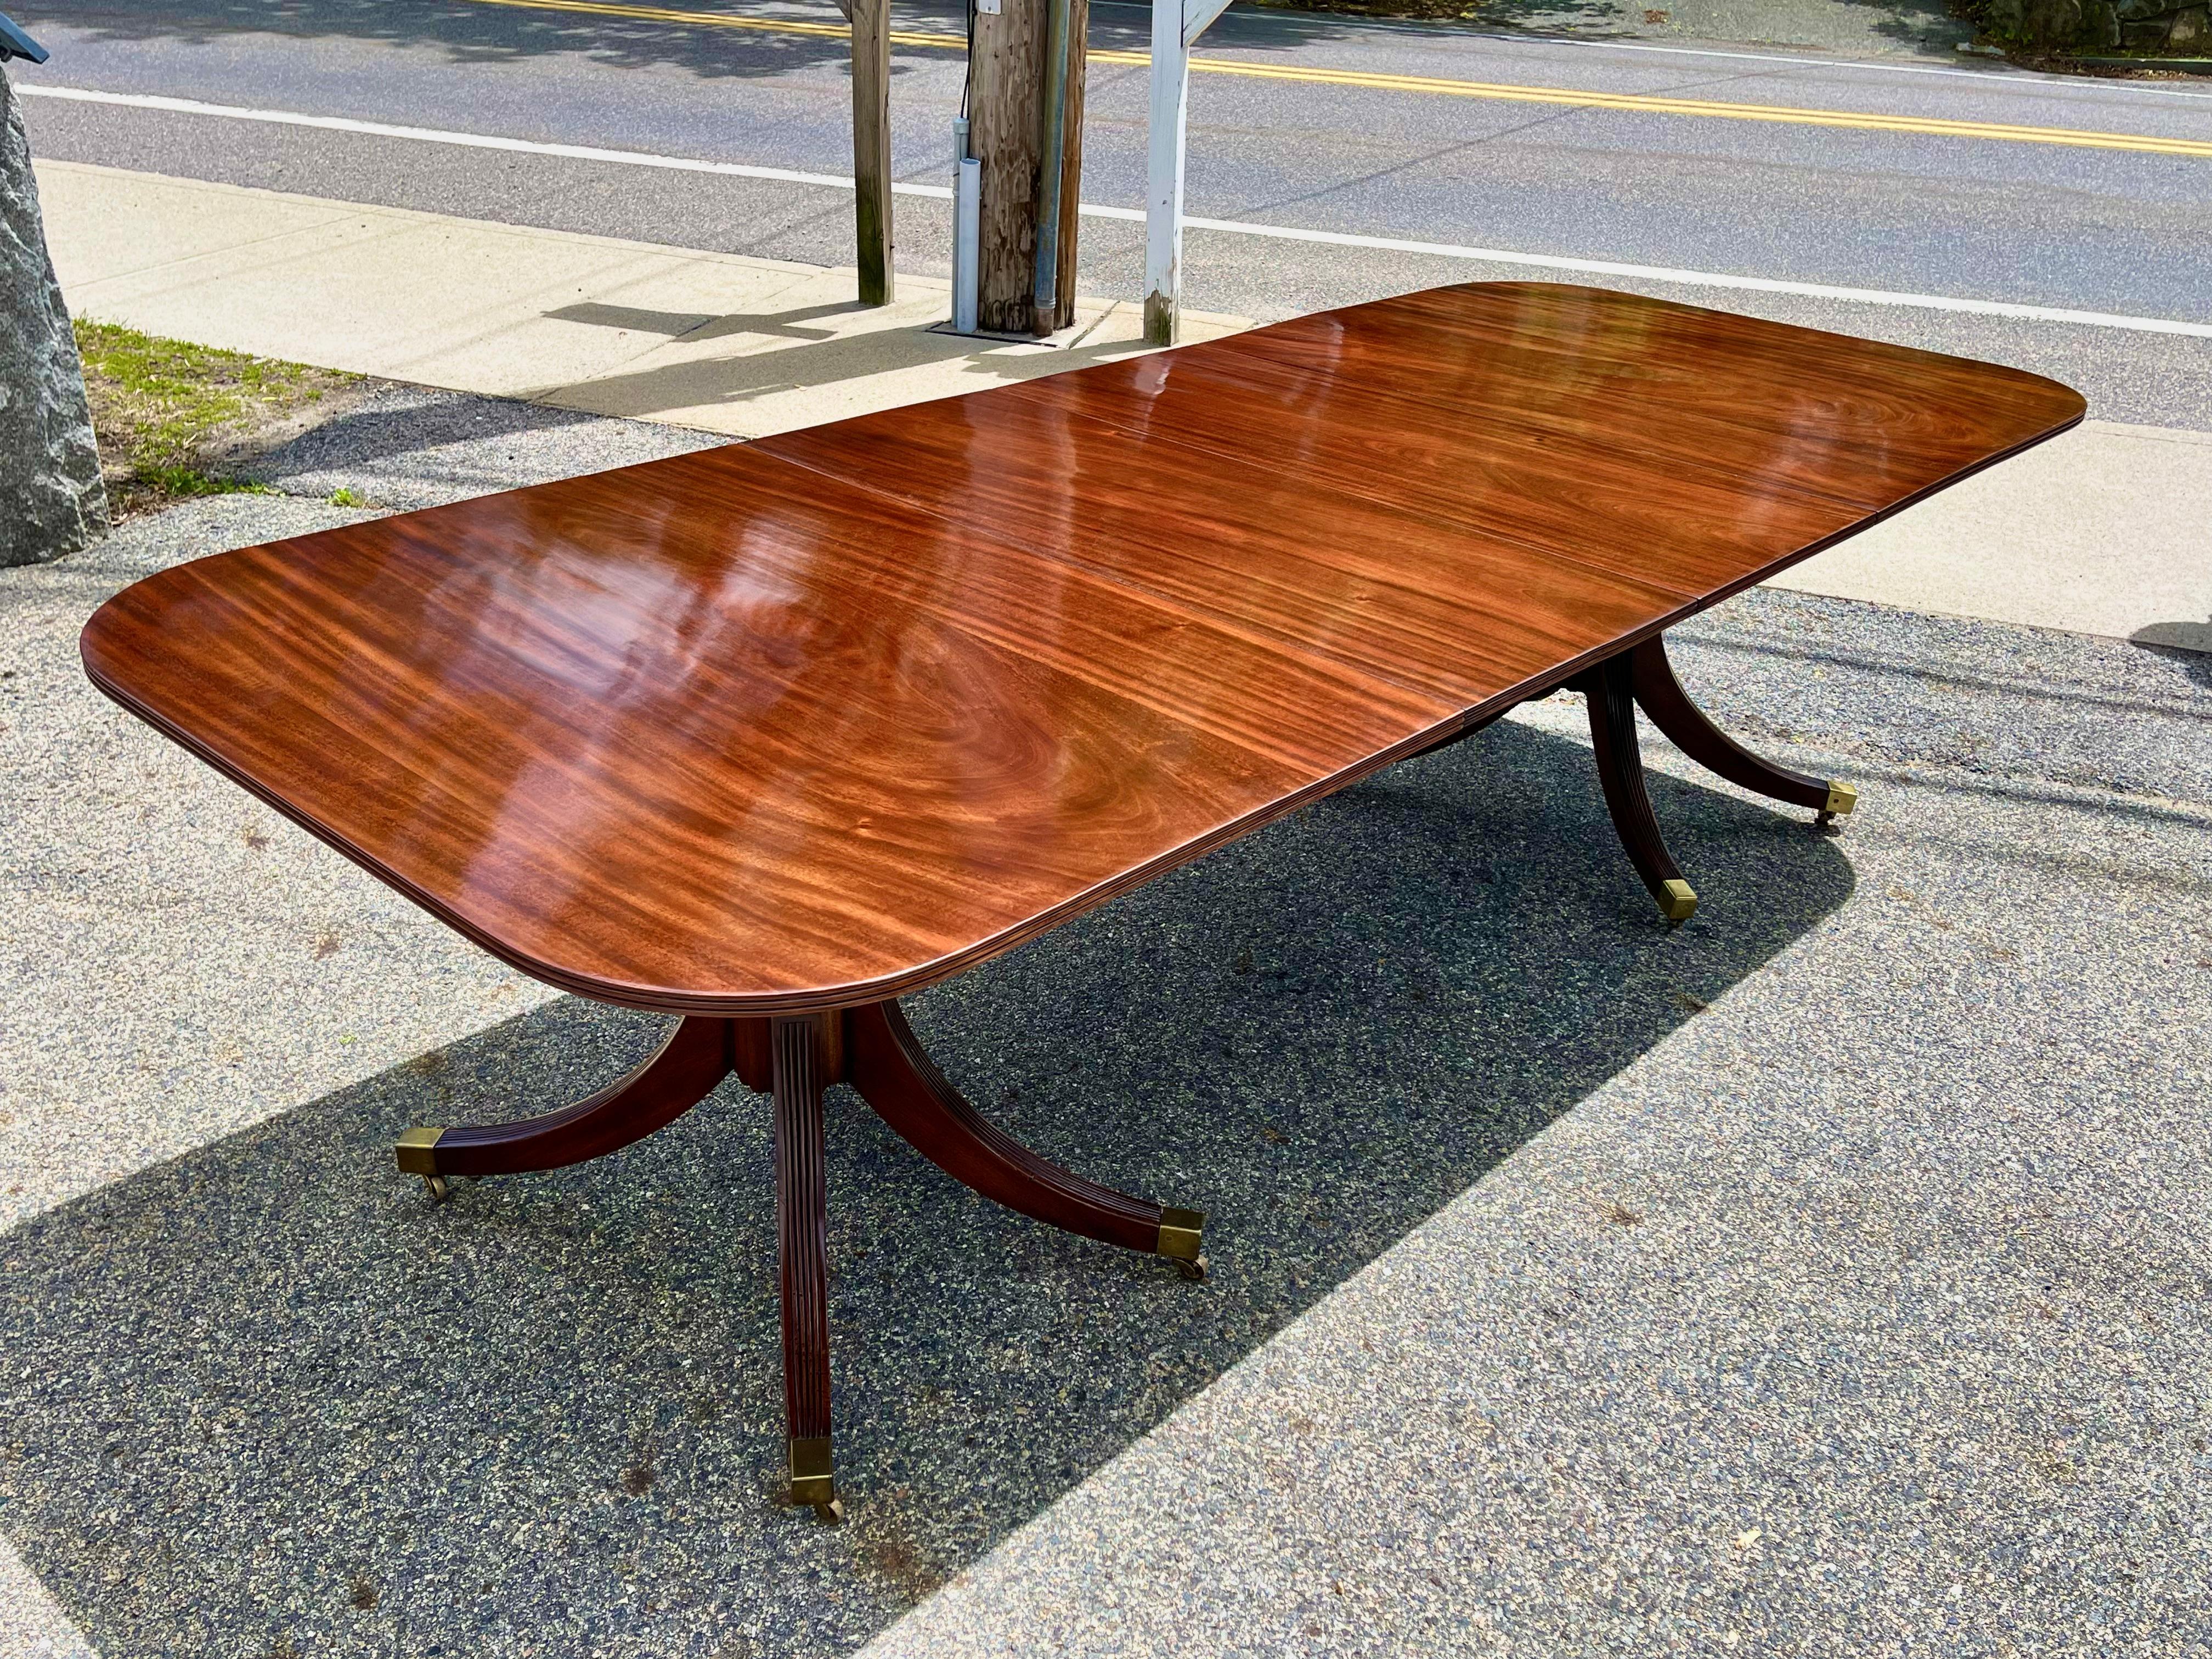 19th century English or American Two Pedestal Mahogany Dining Table. Original Leaves. GREAT color and patina. No previous breaks to pedestals. Stable and solid.

Exquisitely bookmatched boards with flamboyant solid mahogany.